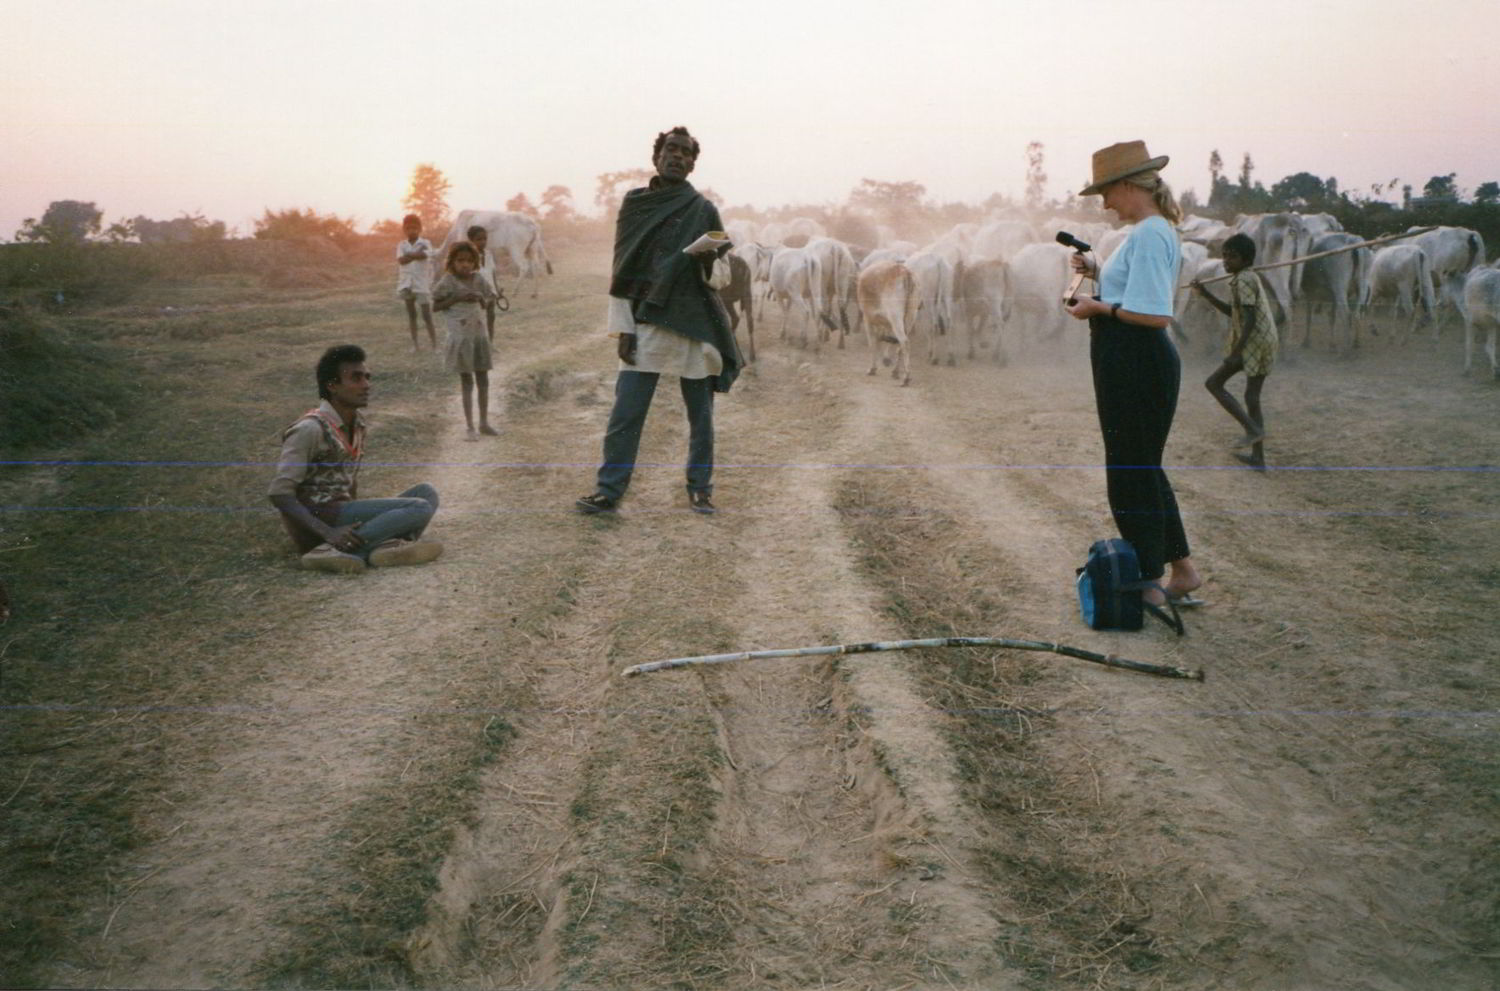 Handspan Theatre Banquet research cattle with agricultural workers in India being photographed by an Australian woman